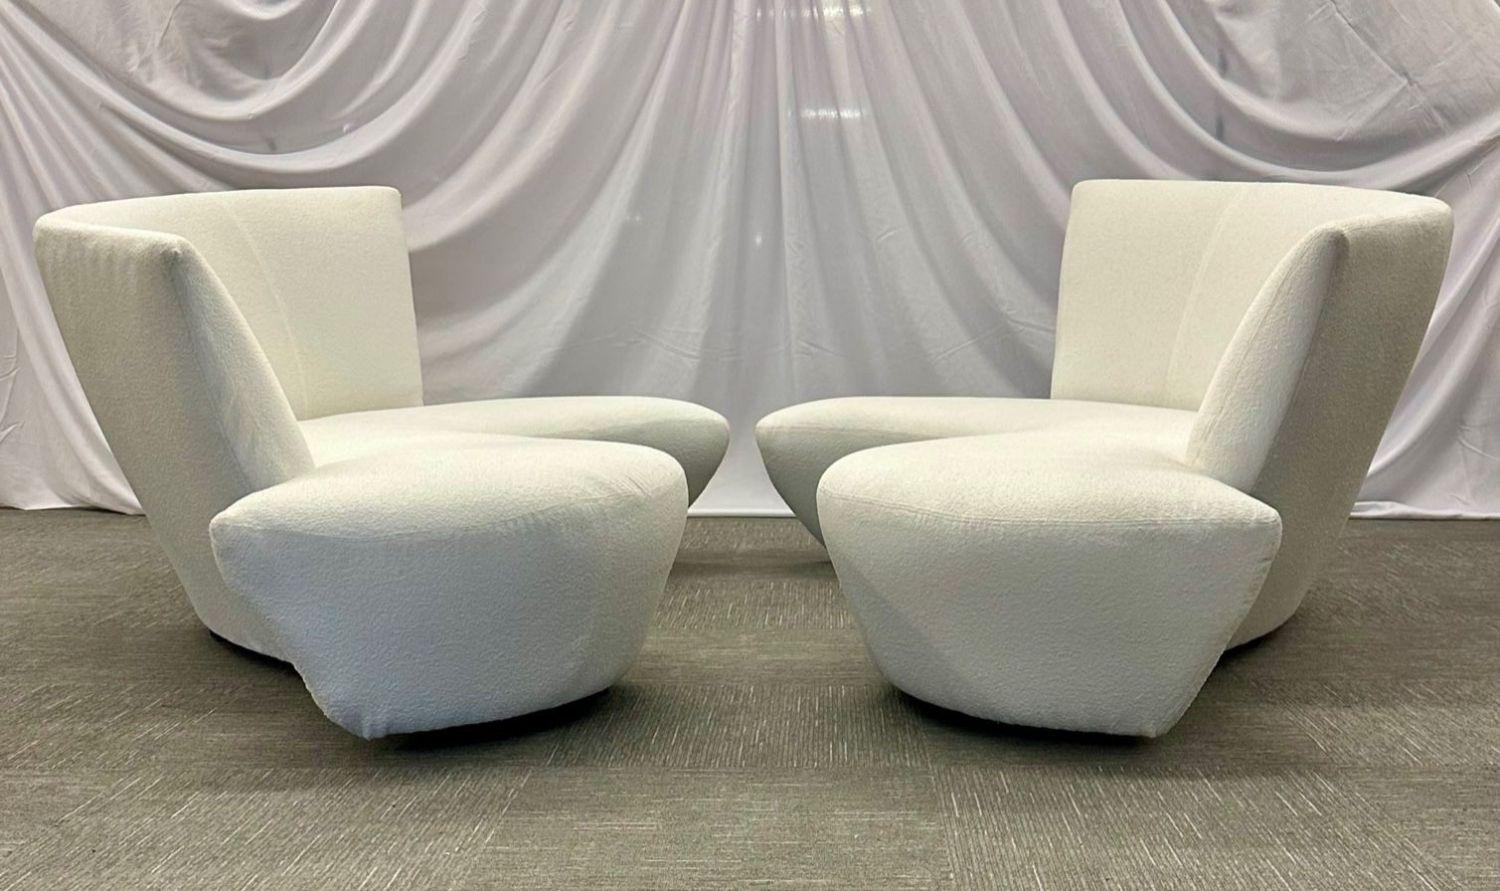 Pair of Mid-Century Modern Organic Vladimir Kagan Bilbao Sofas, White Boucle
 
Pair of handsome mid-century modern organic form sofas by Vladimir Kagan. Kagan originally drew inspiration for this dramatic design from the curves and undulations of